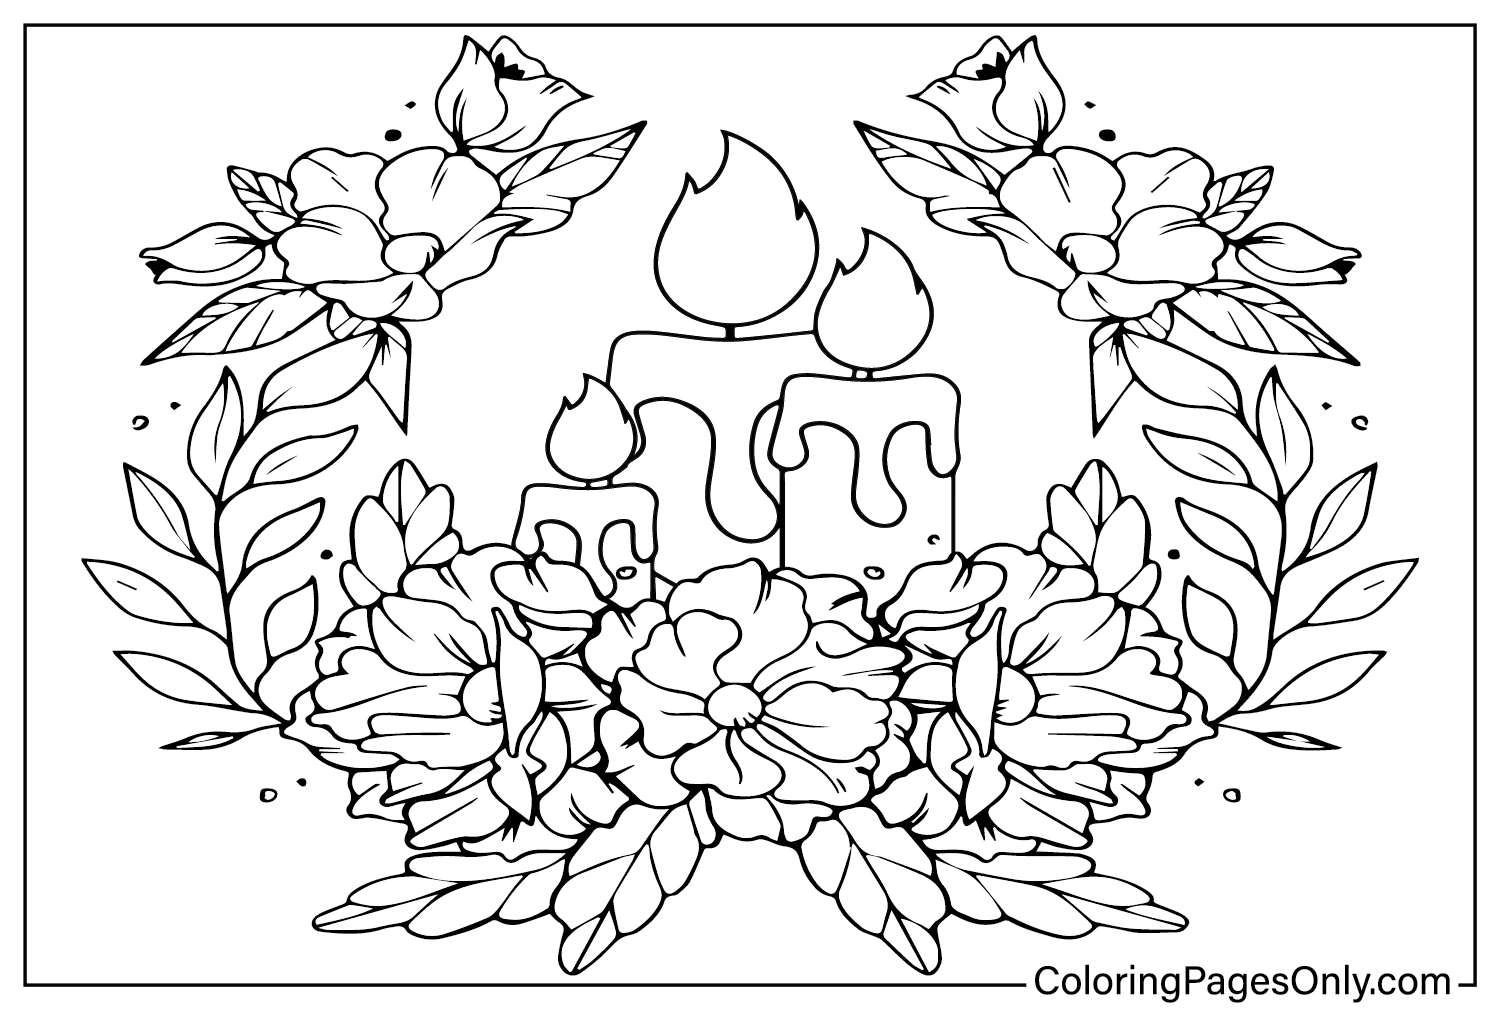 Advent Wreath Coloring Page from Advent Wreath